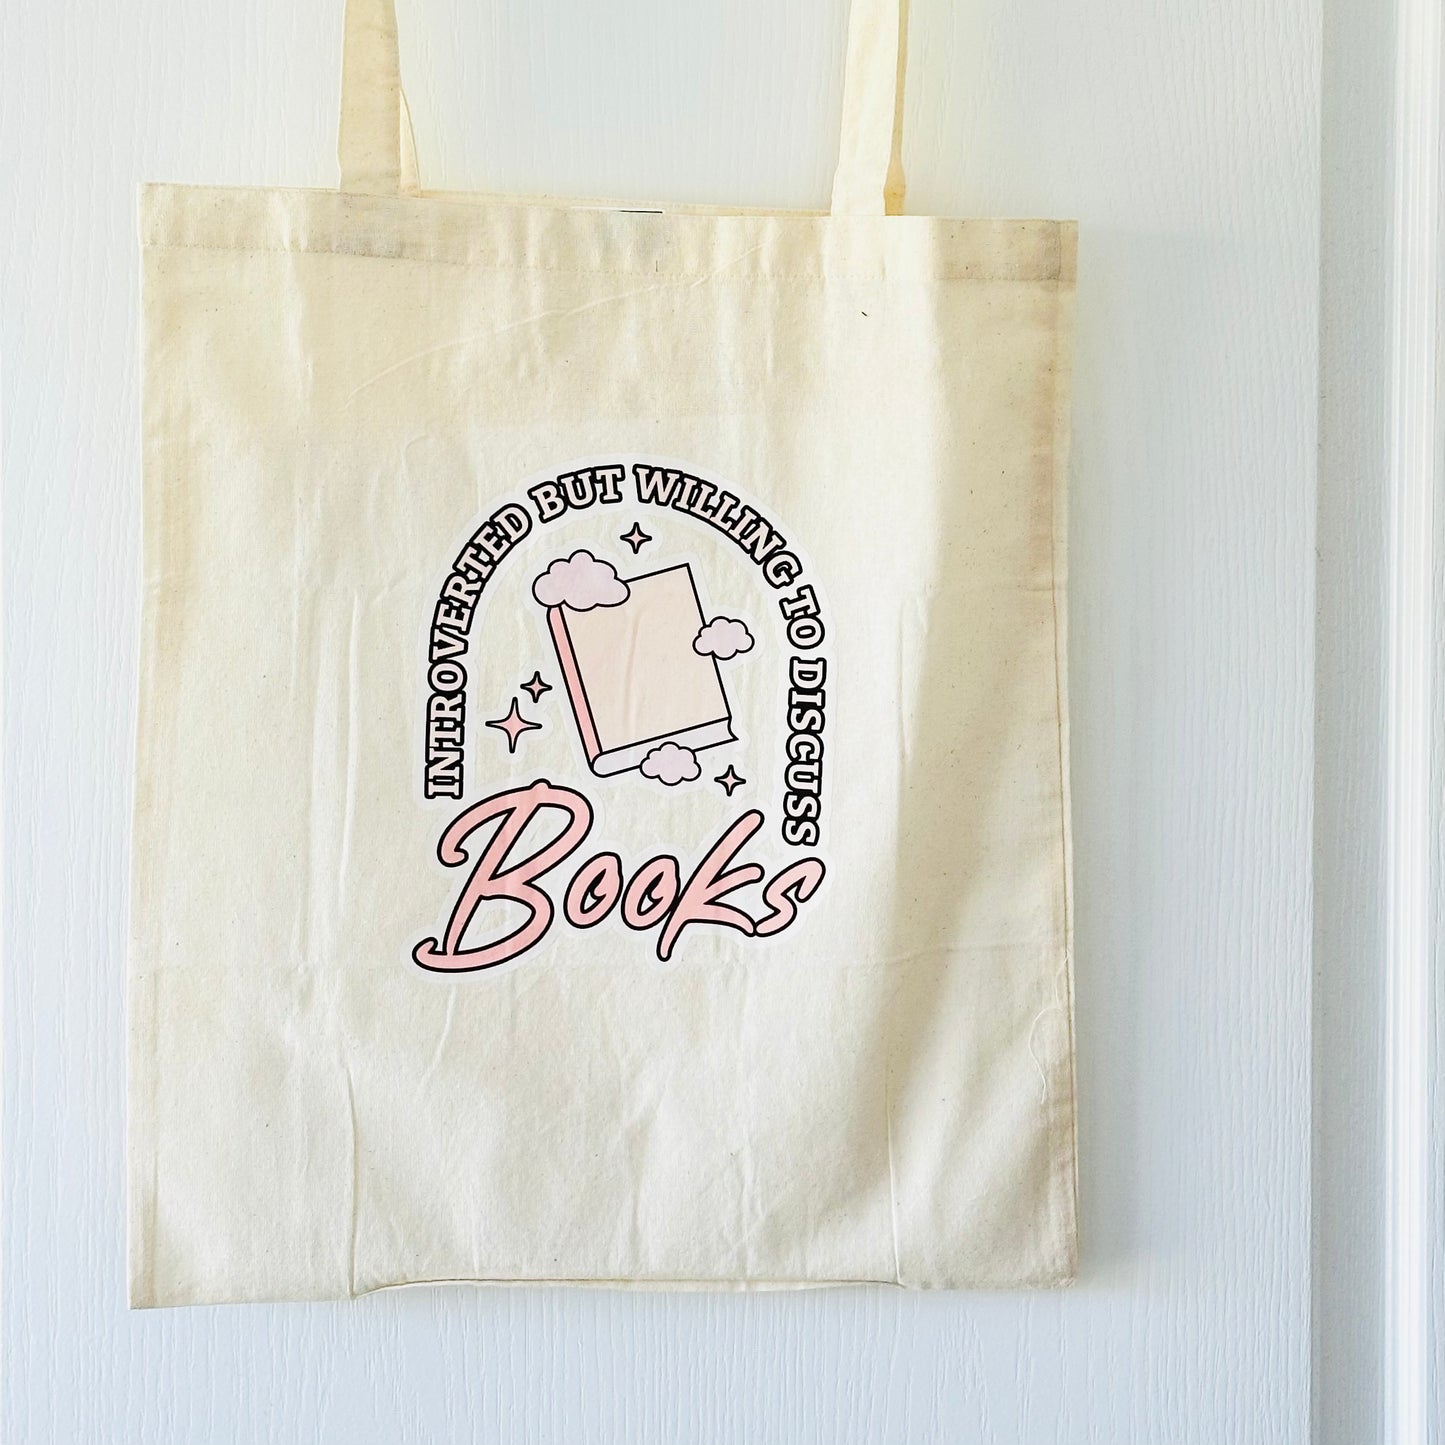 Introverted but willing to discuss books - Cotton Tote Bag